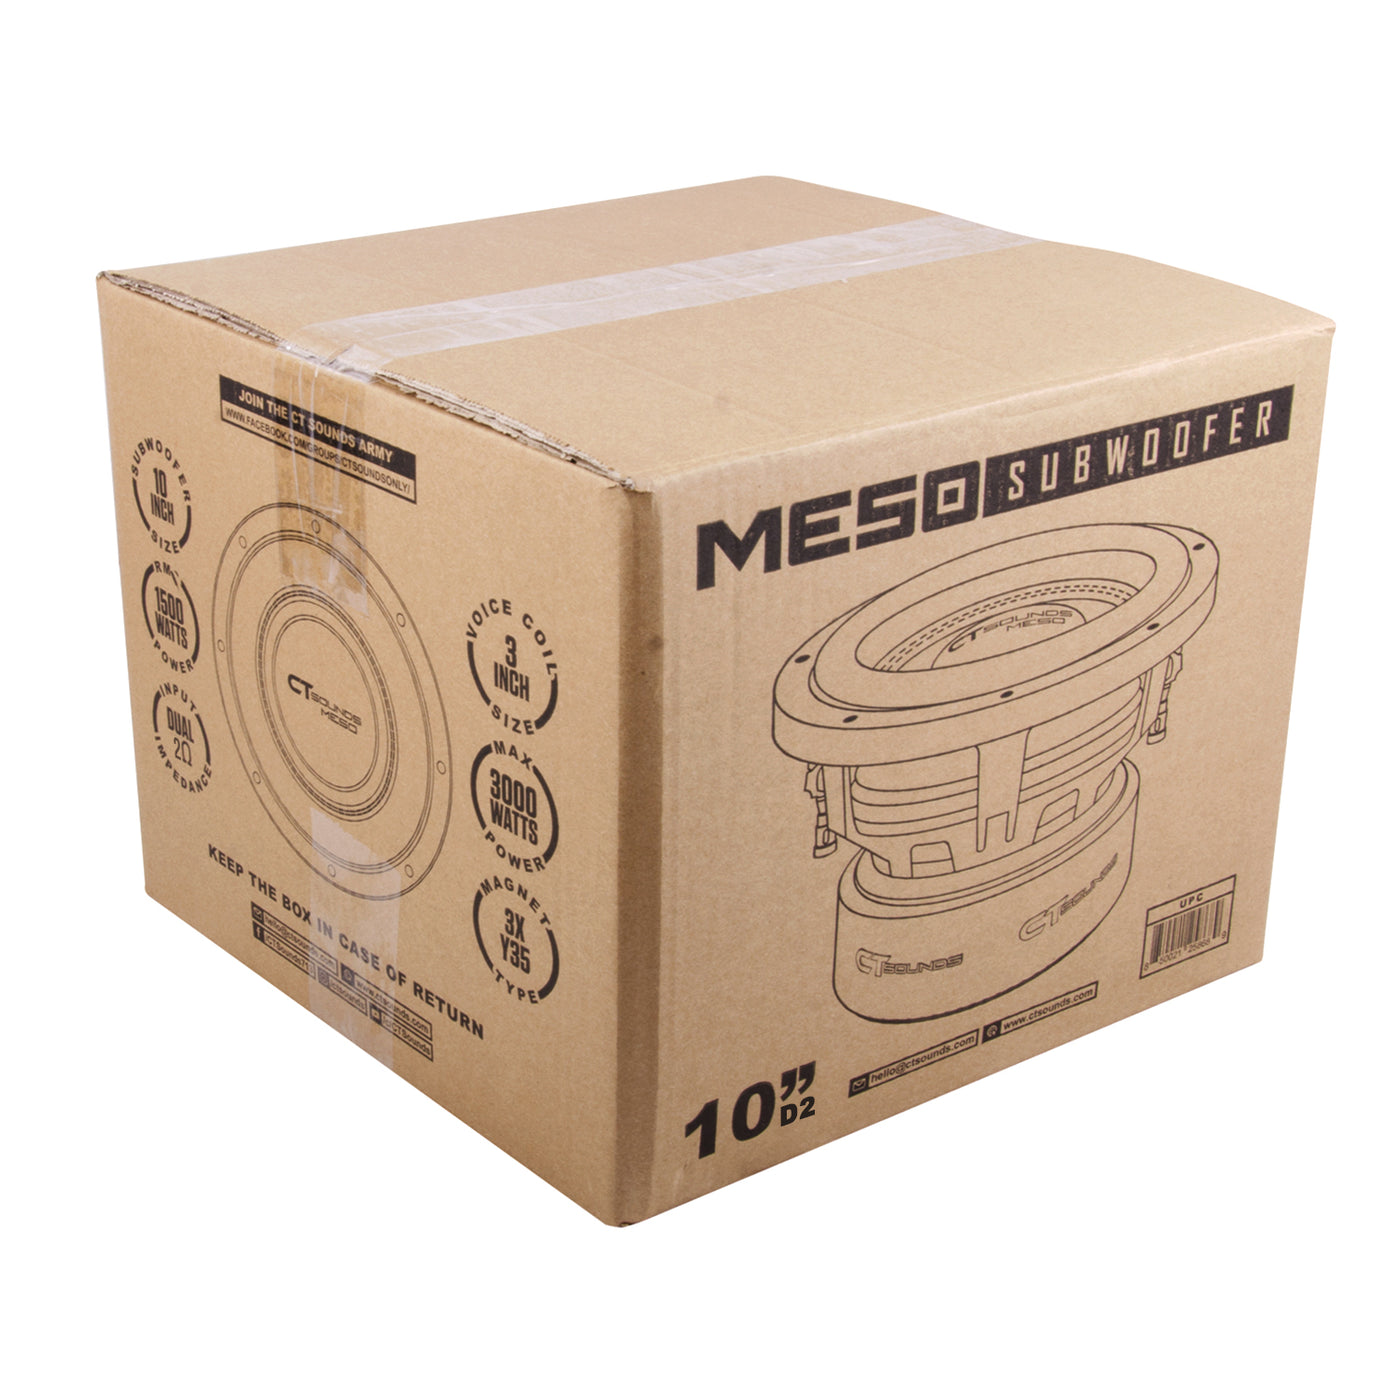 MESO-10-D2 // 1500 Watts RMS 10 Inch Car Subwoofer - CT SOUNDS